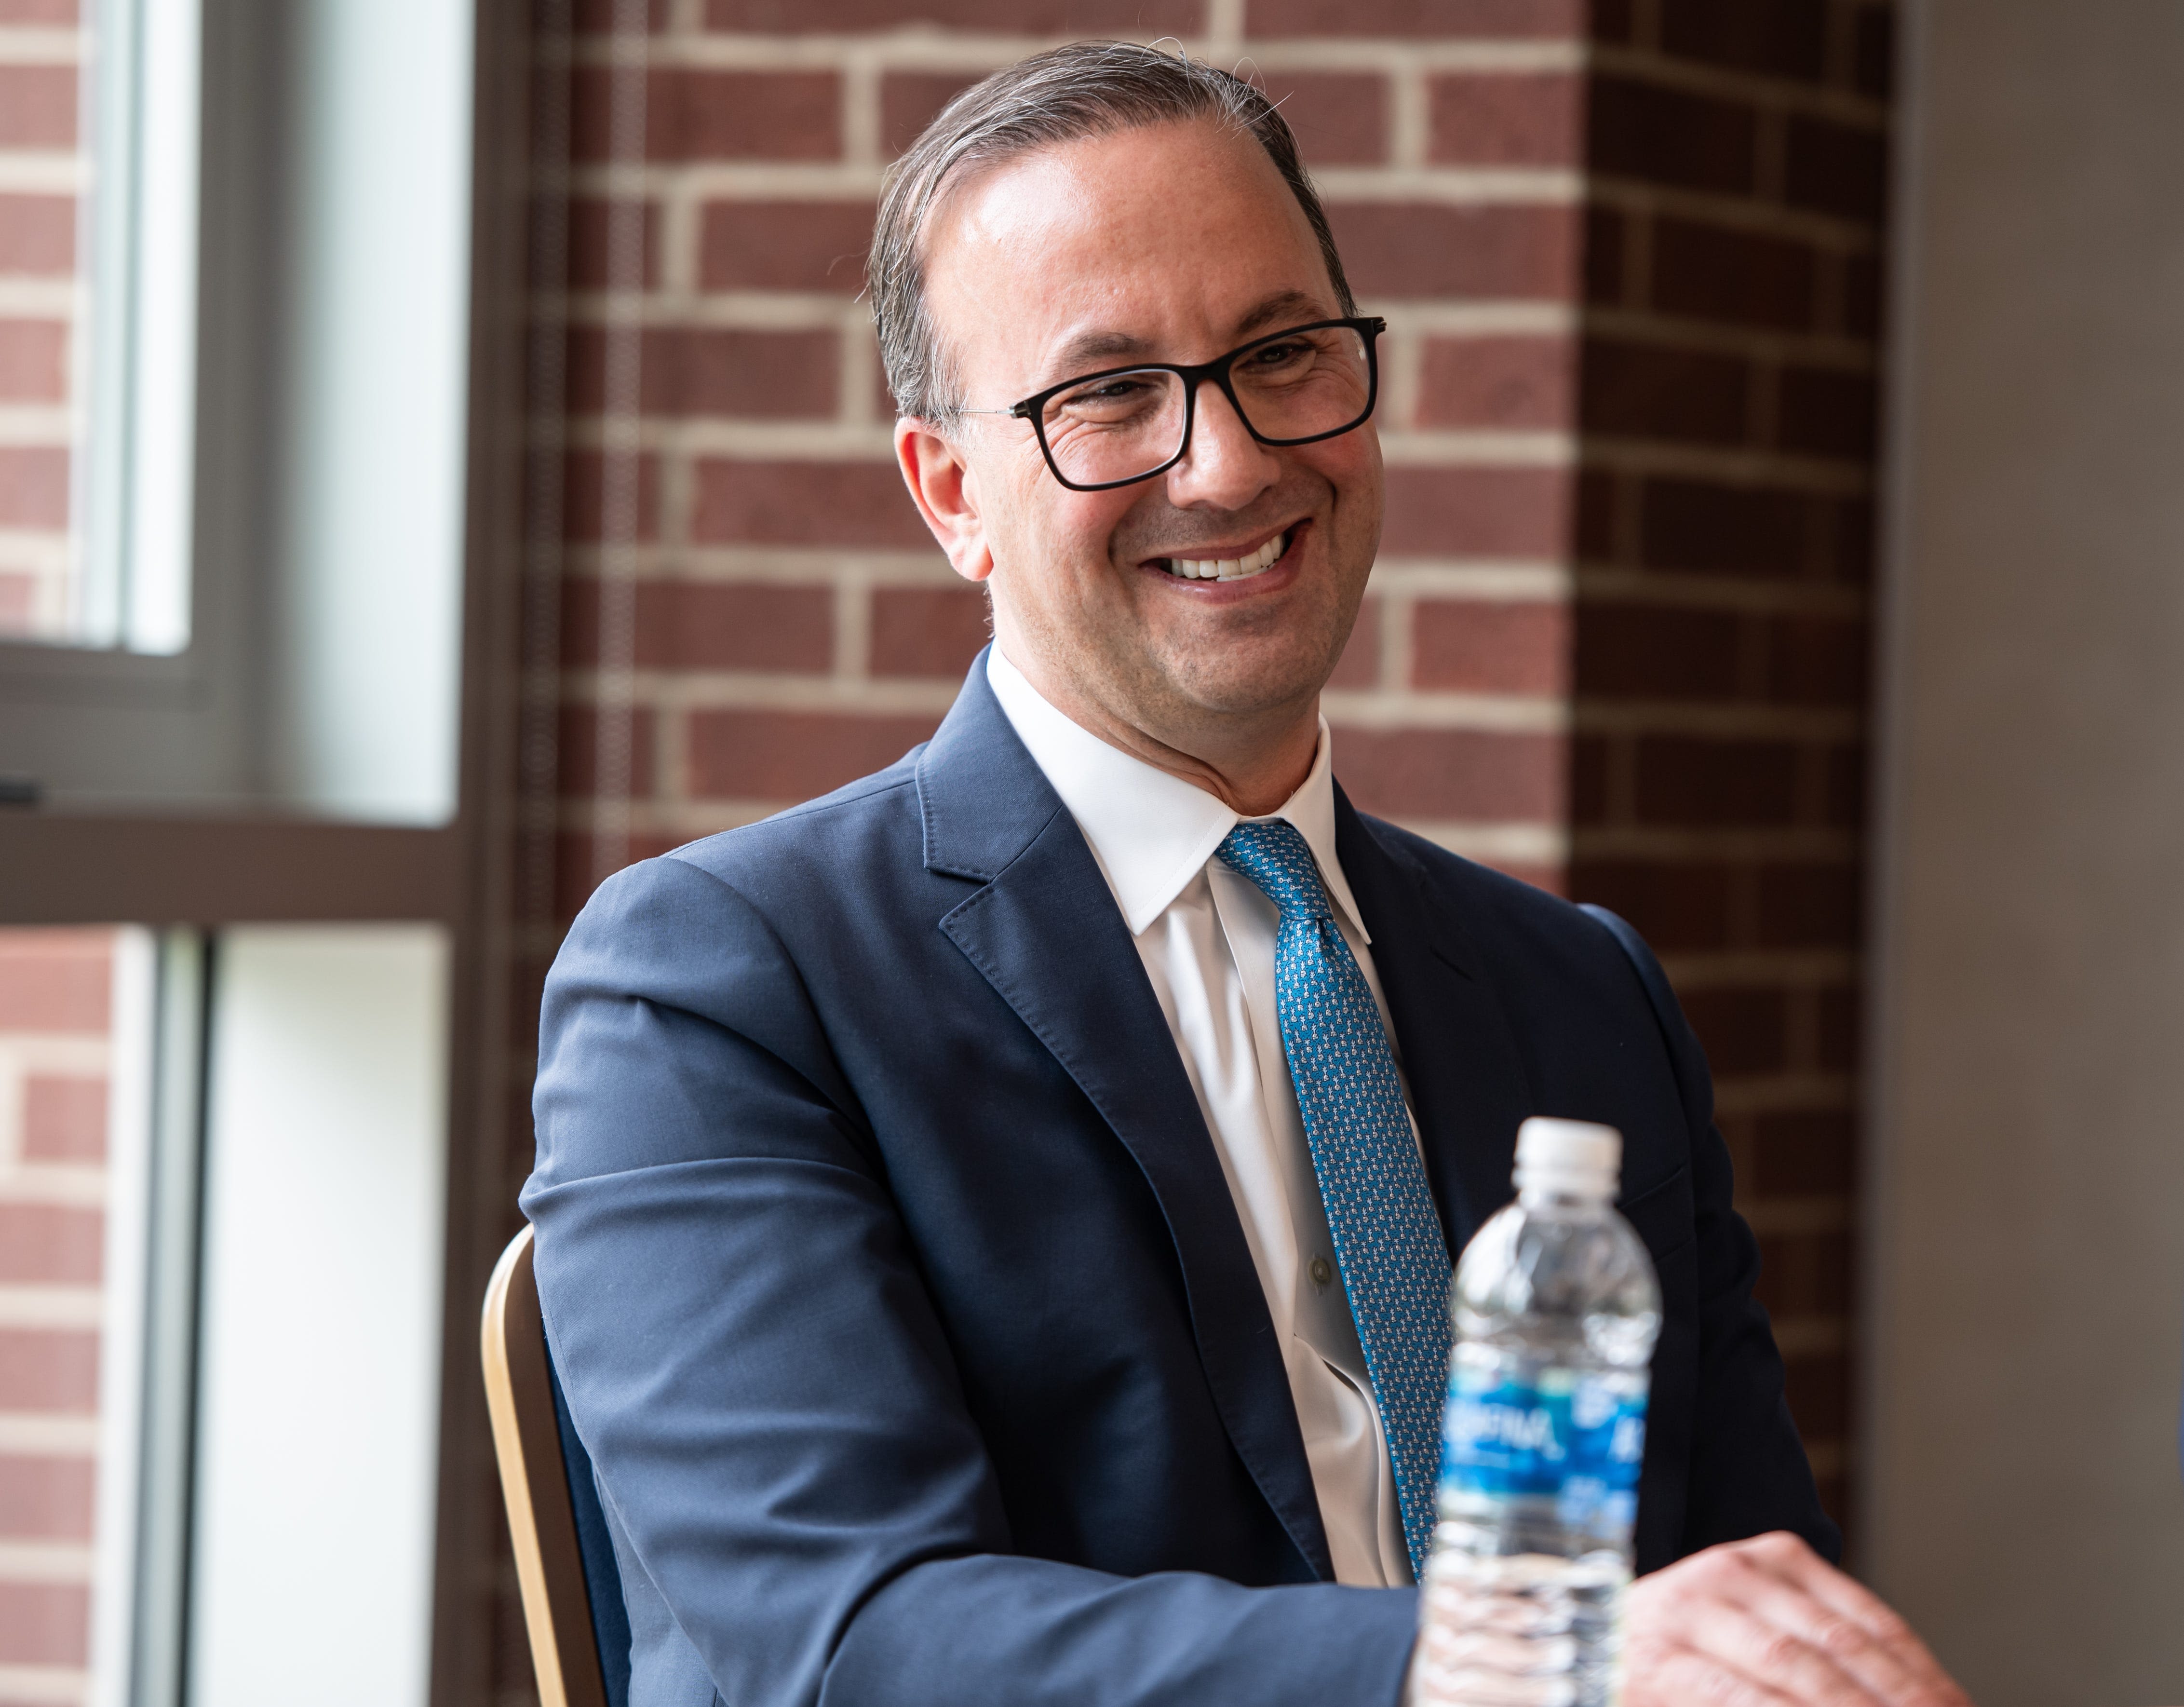 Behind the scenes of how R.J. Nemer became University of Akron's new president